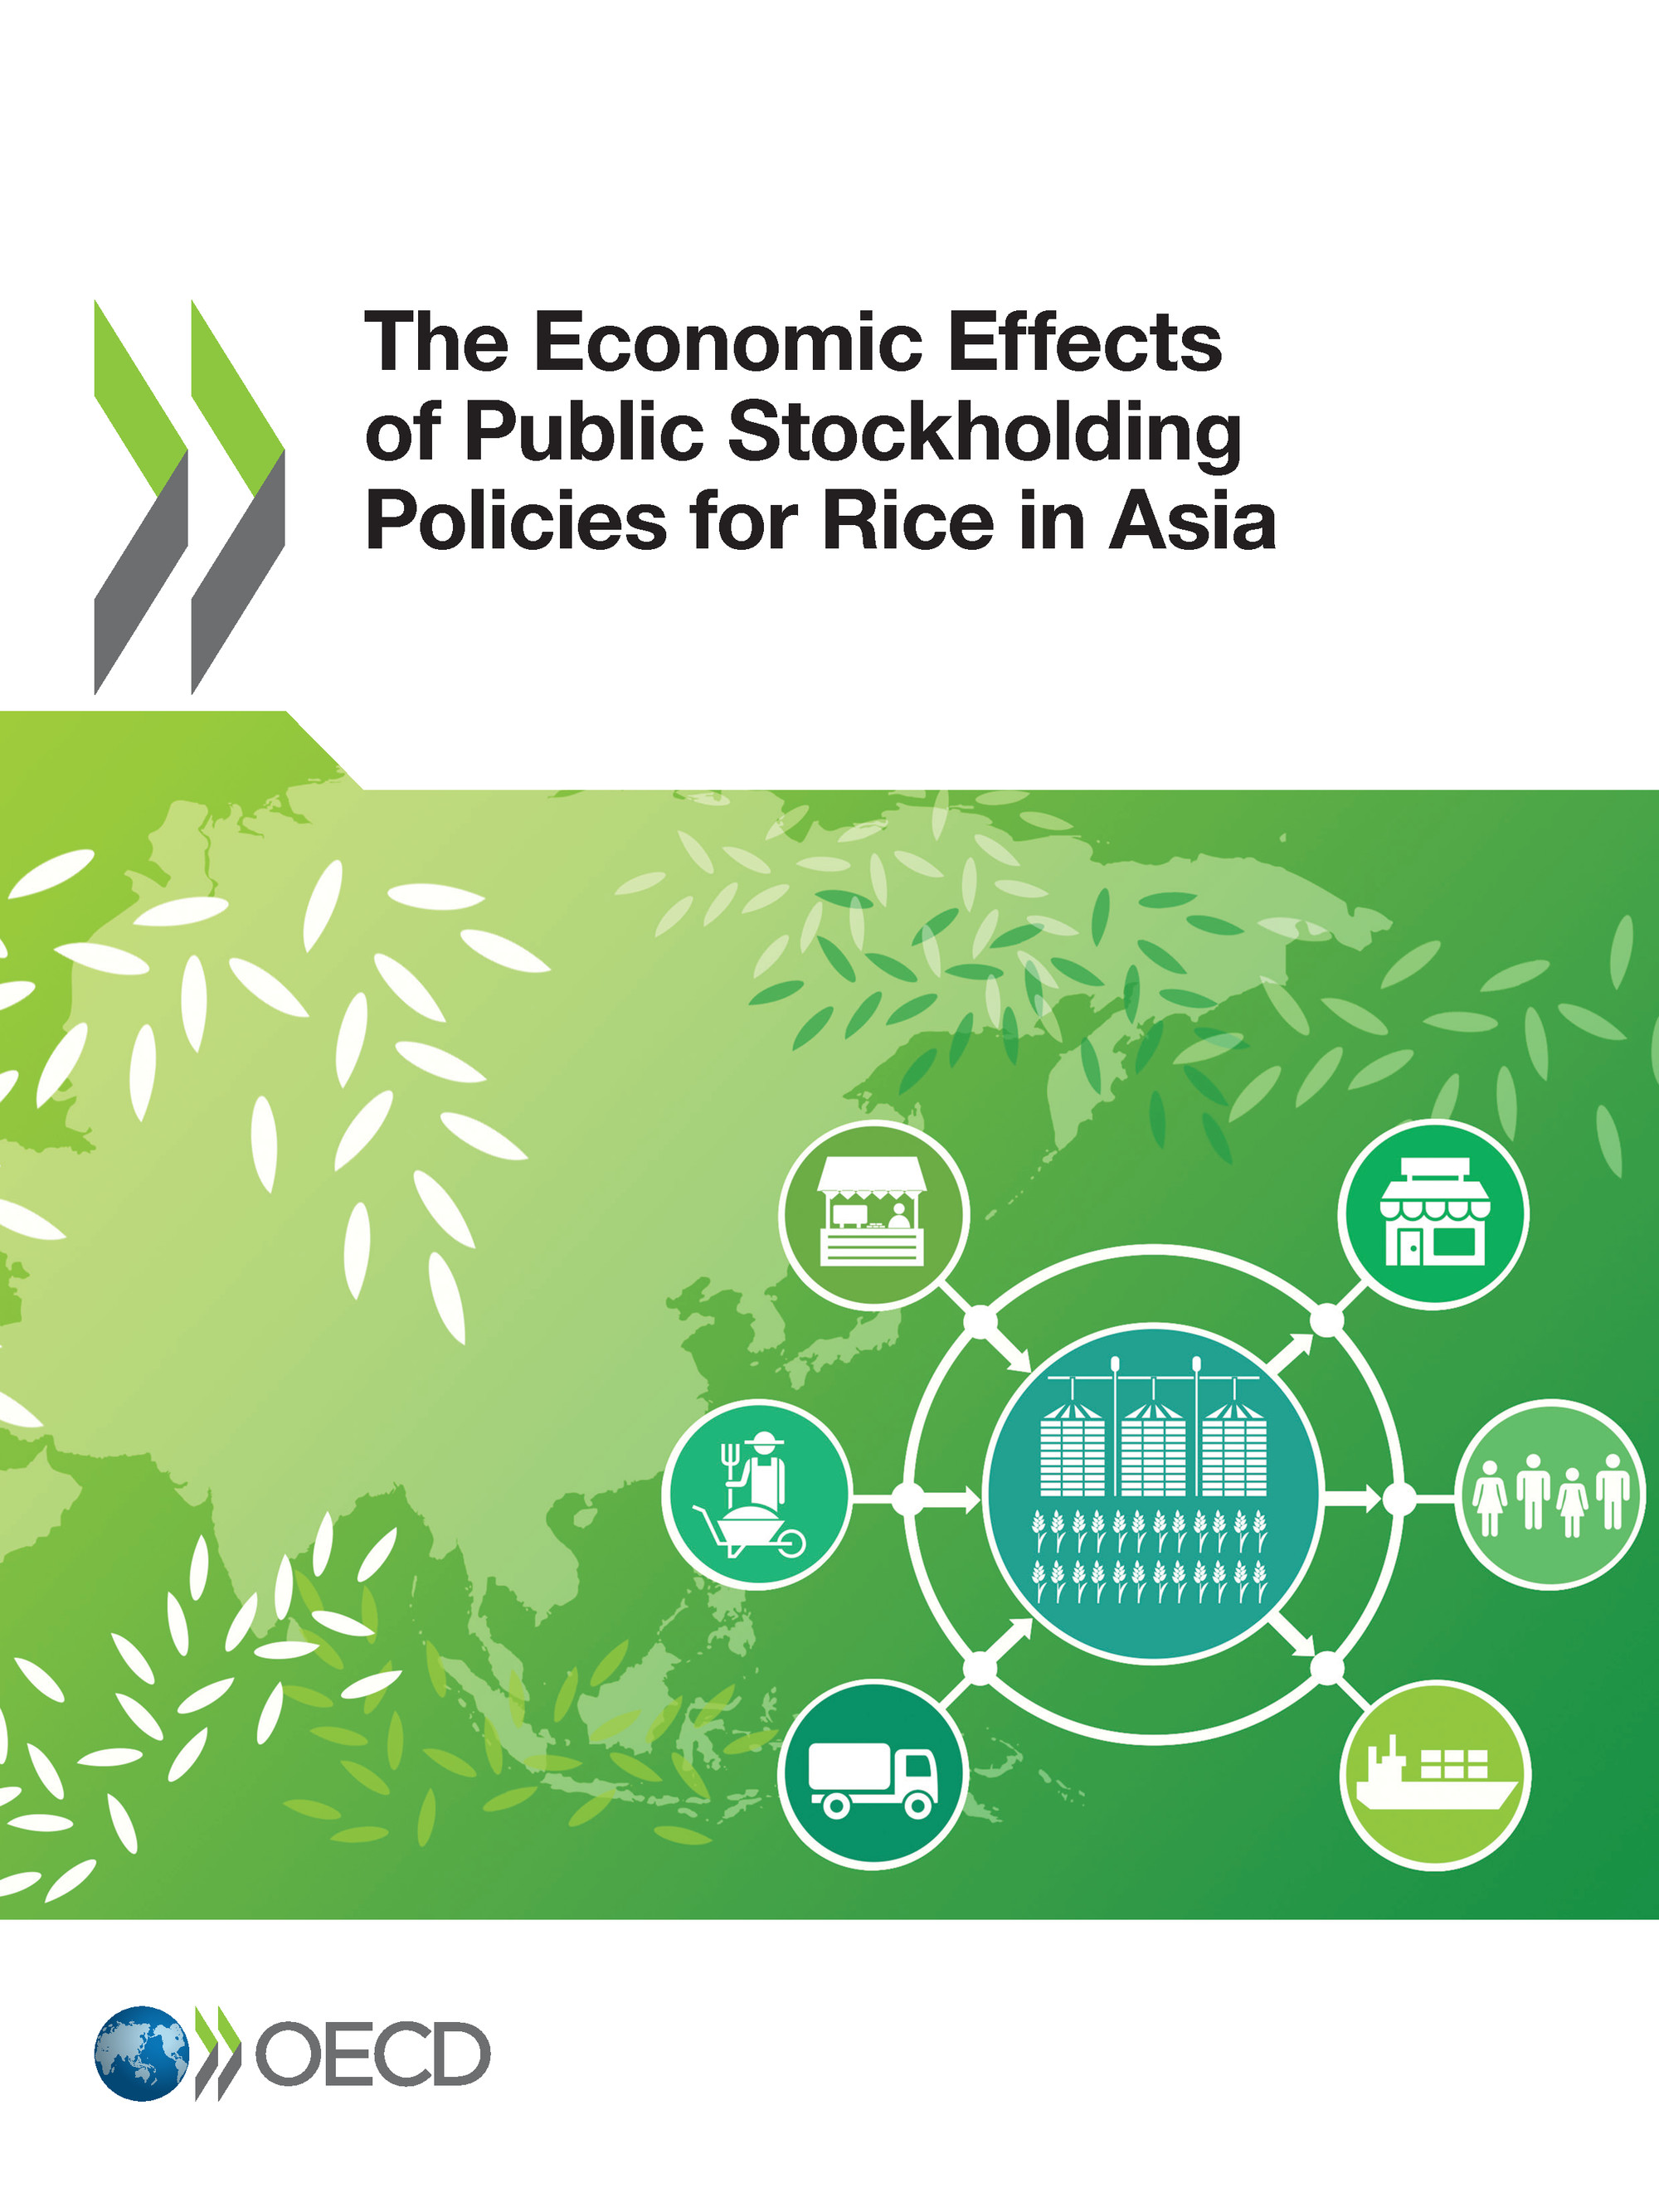 The Economic Effects of Public Stockholding Policies for Rice in Asia - Collective Collective - OCDE / OECD